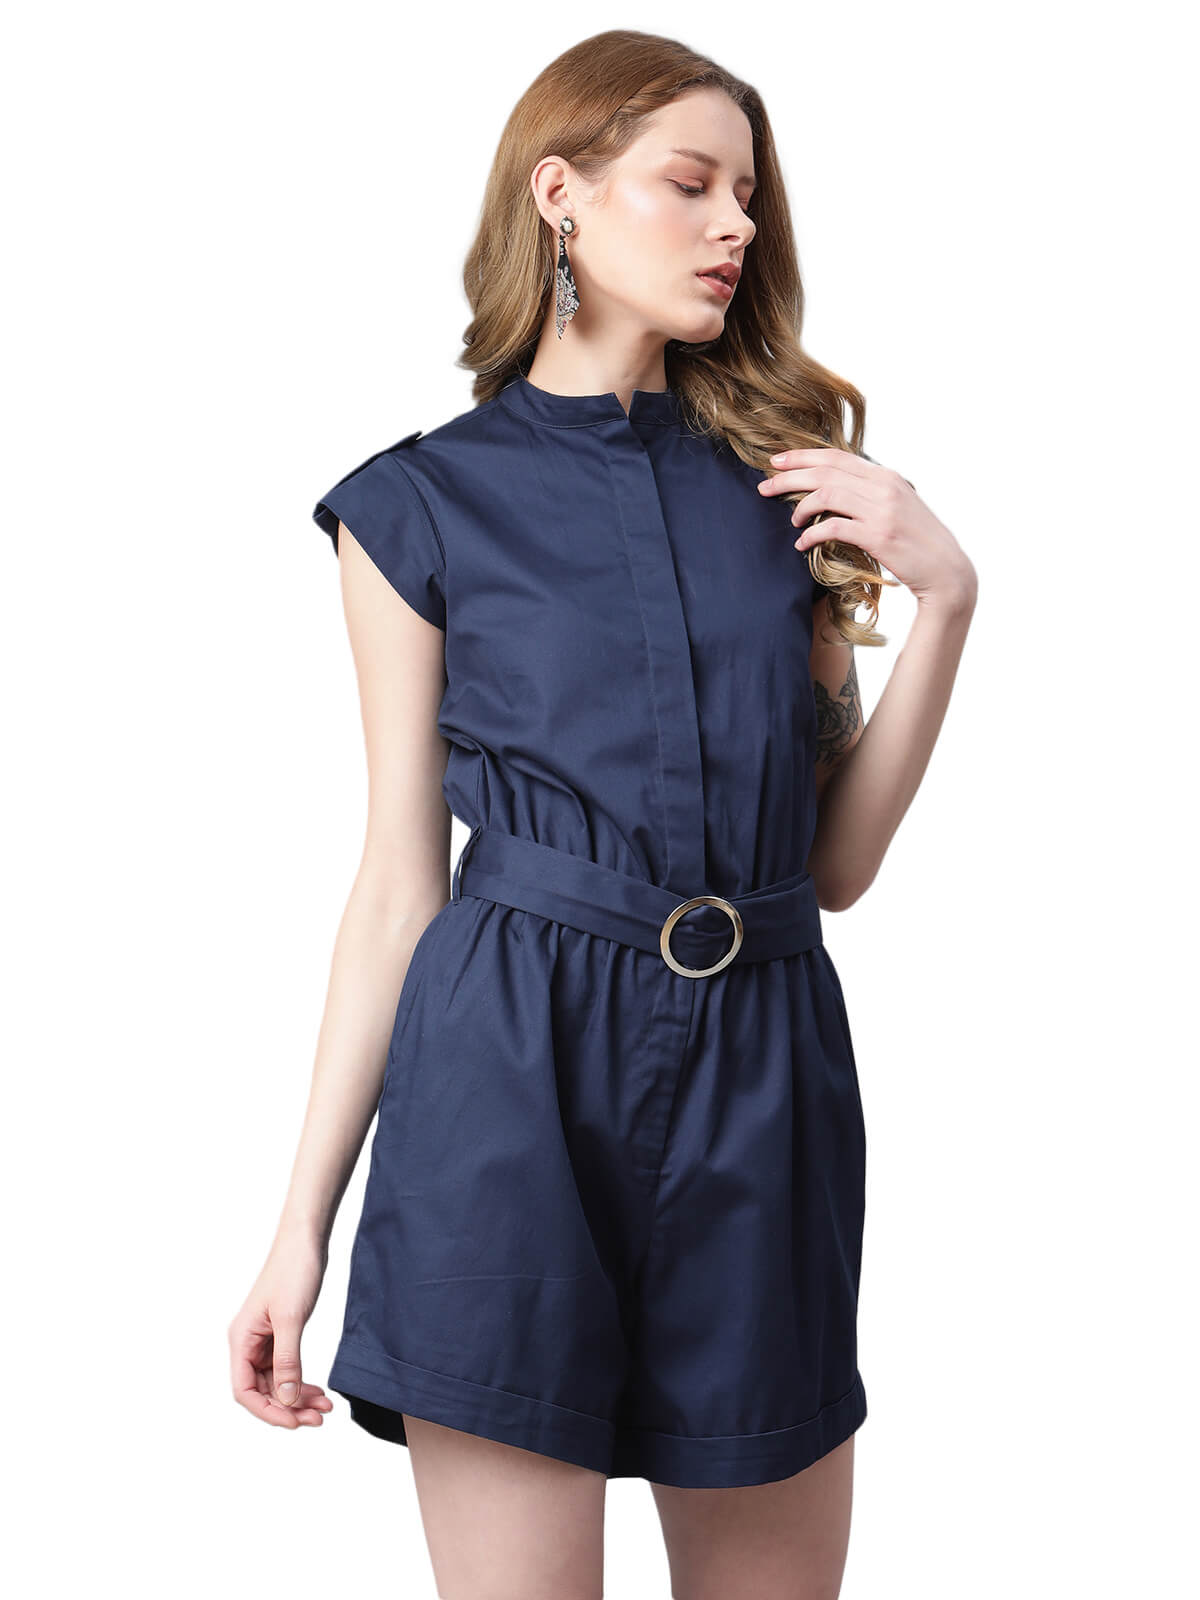 Eco Round Neck Play Suit With Belt And Buckle,